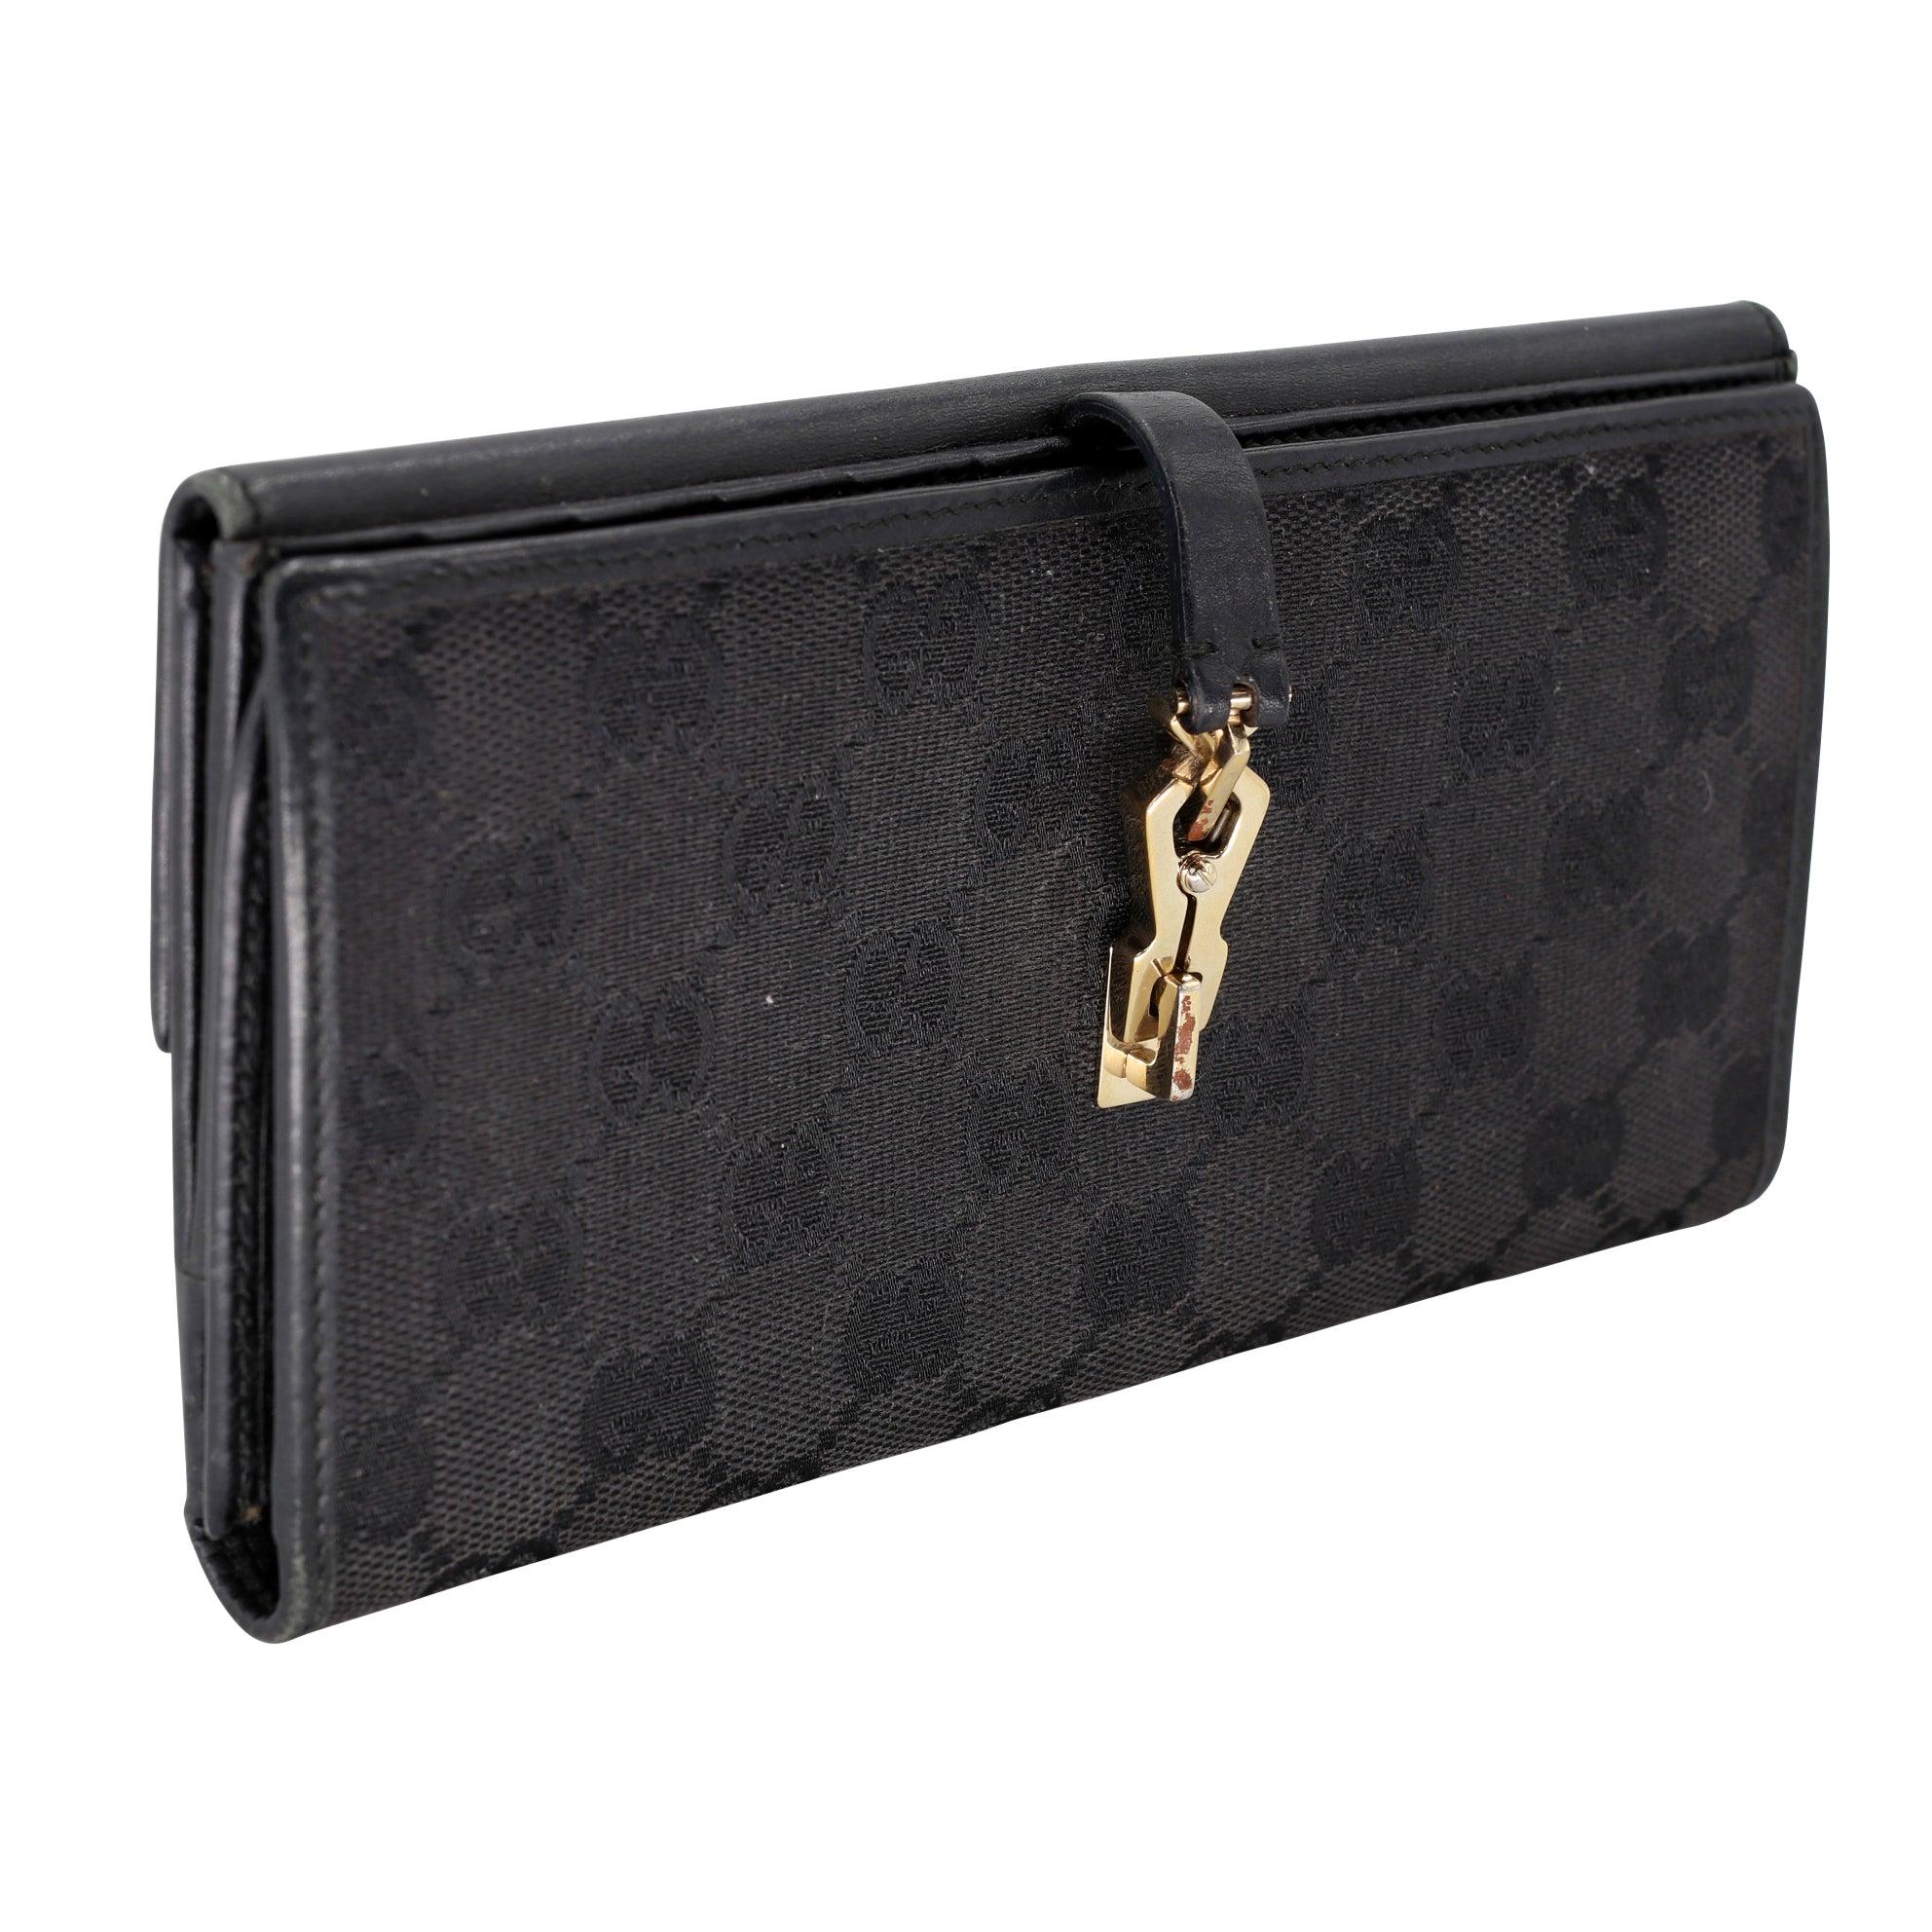 The Italian fashion house of Gucci continues to reinterpret its rich heritage with decidedly modern, yet classic designs. Their icons are numerous, from the traditional lock for the handle. Wallet is in pre-loved condition with basic wear there is